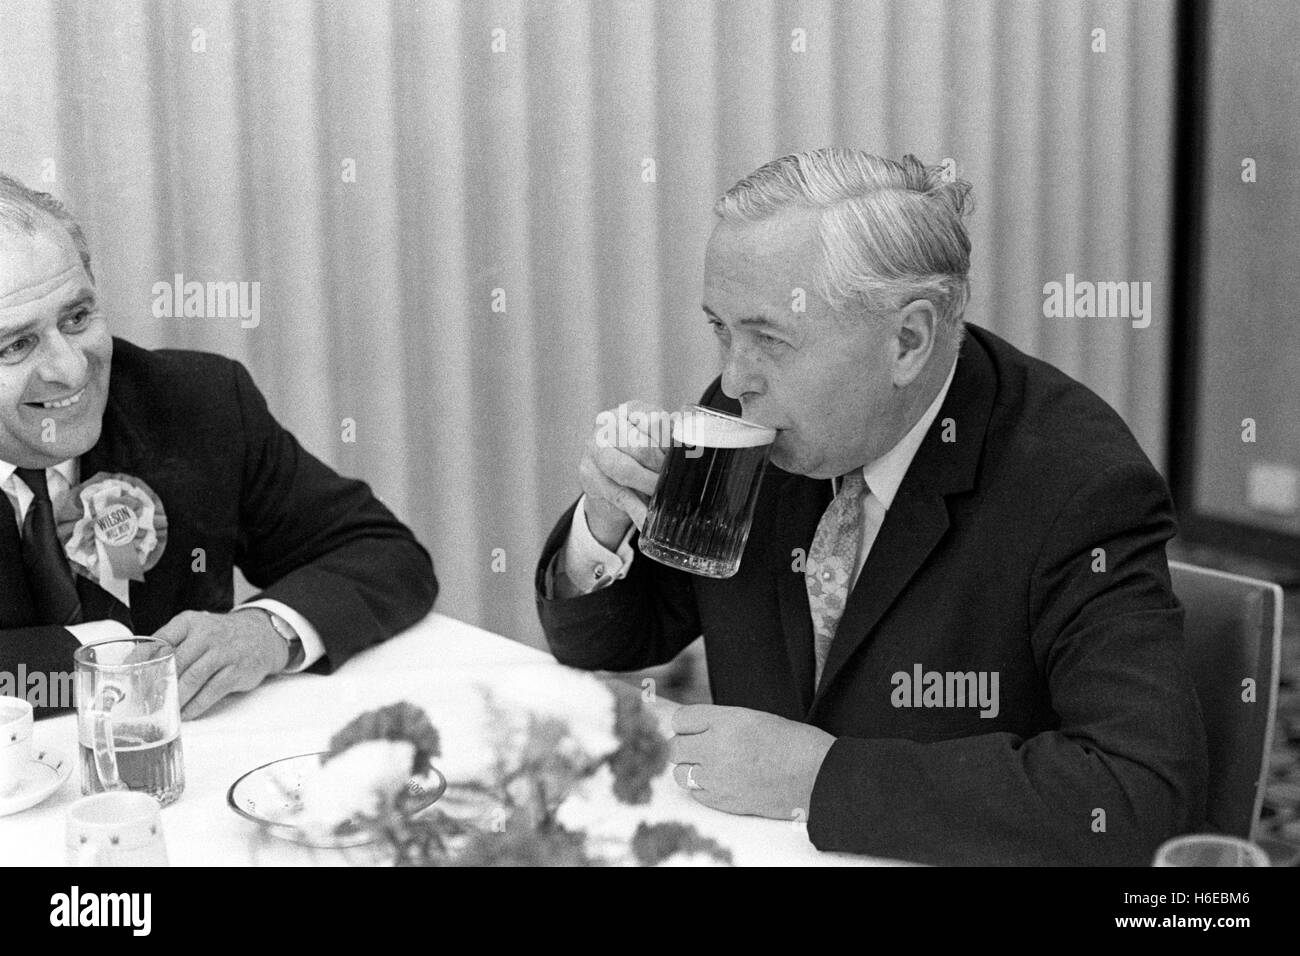 Harold Wilson takes a break with a glass of beer during a Election Day canvassing in his Huyton constituency.PA AF 146300-15 Stock Photo